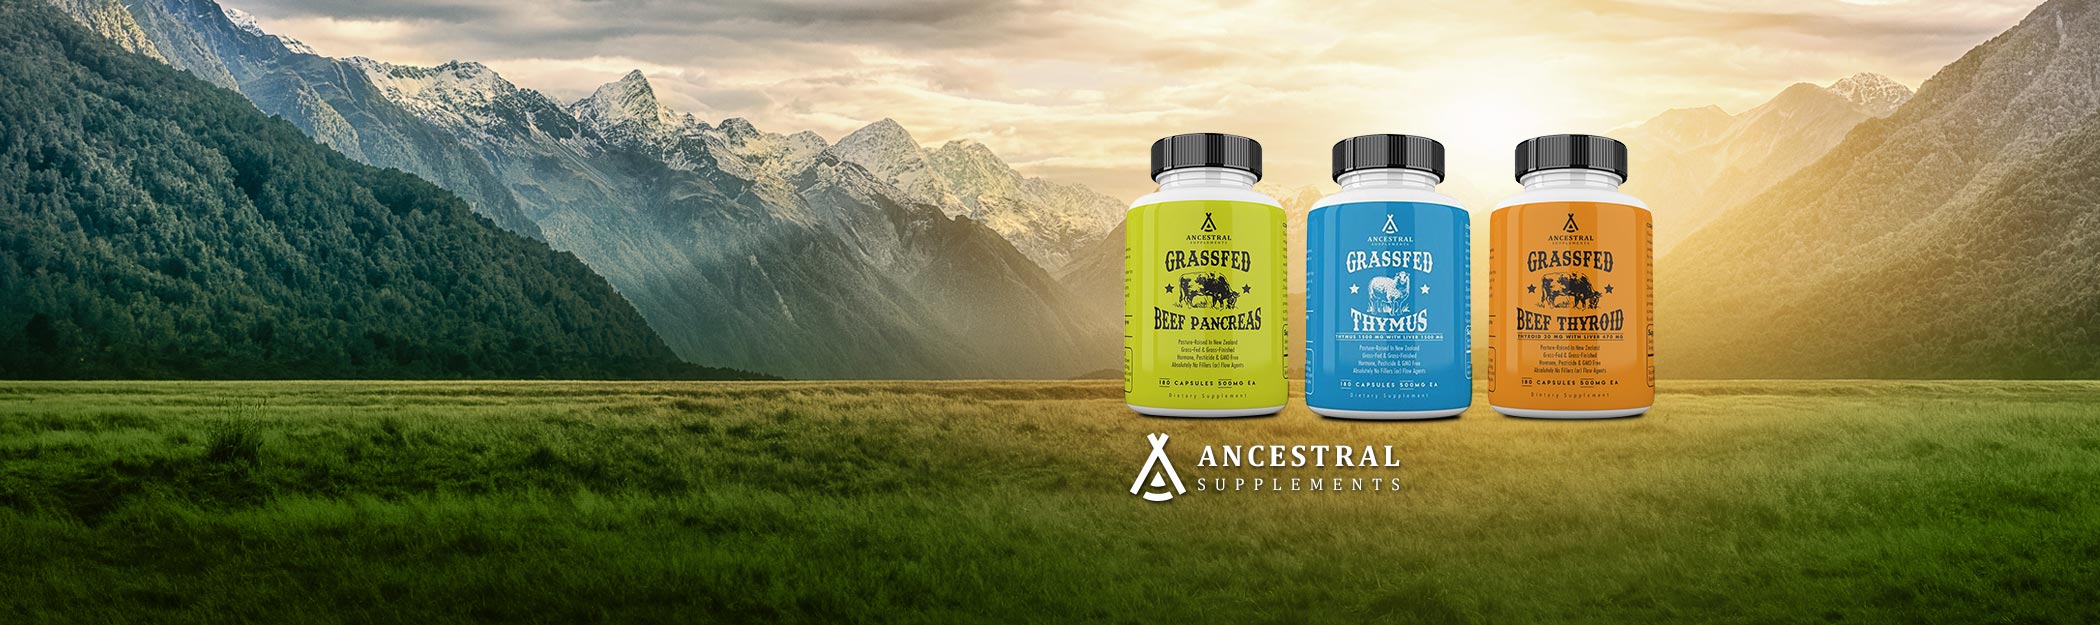 Ancestral Supplements UK - Brian Johnson's Story